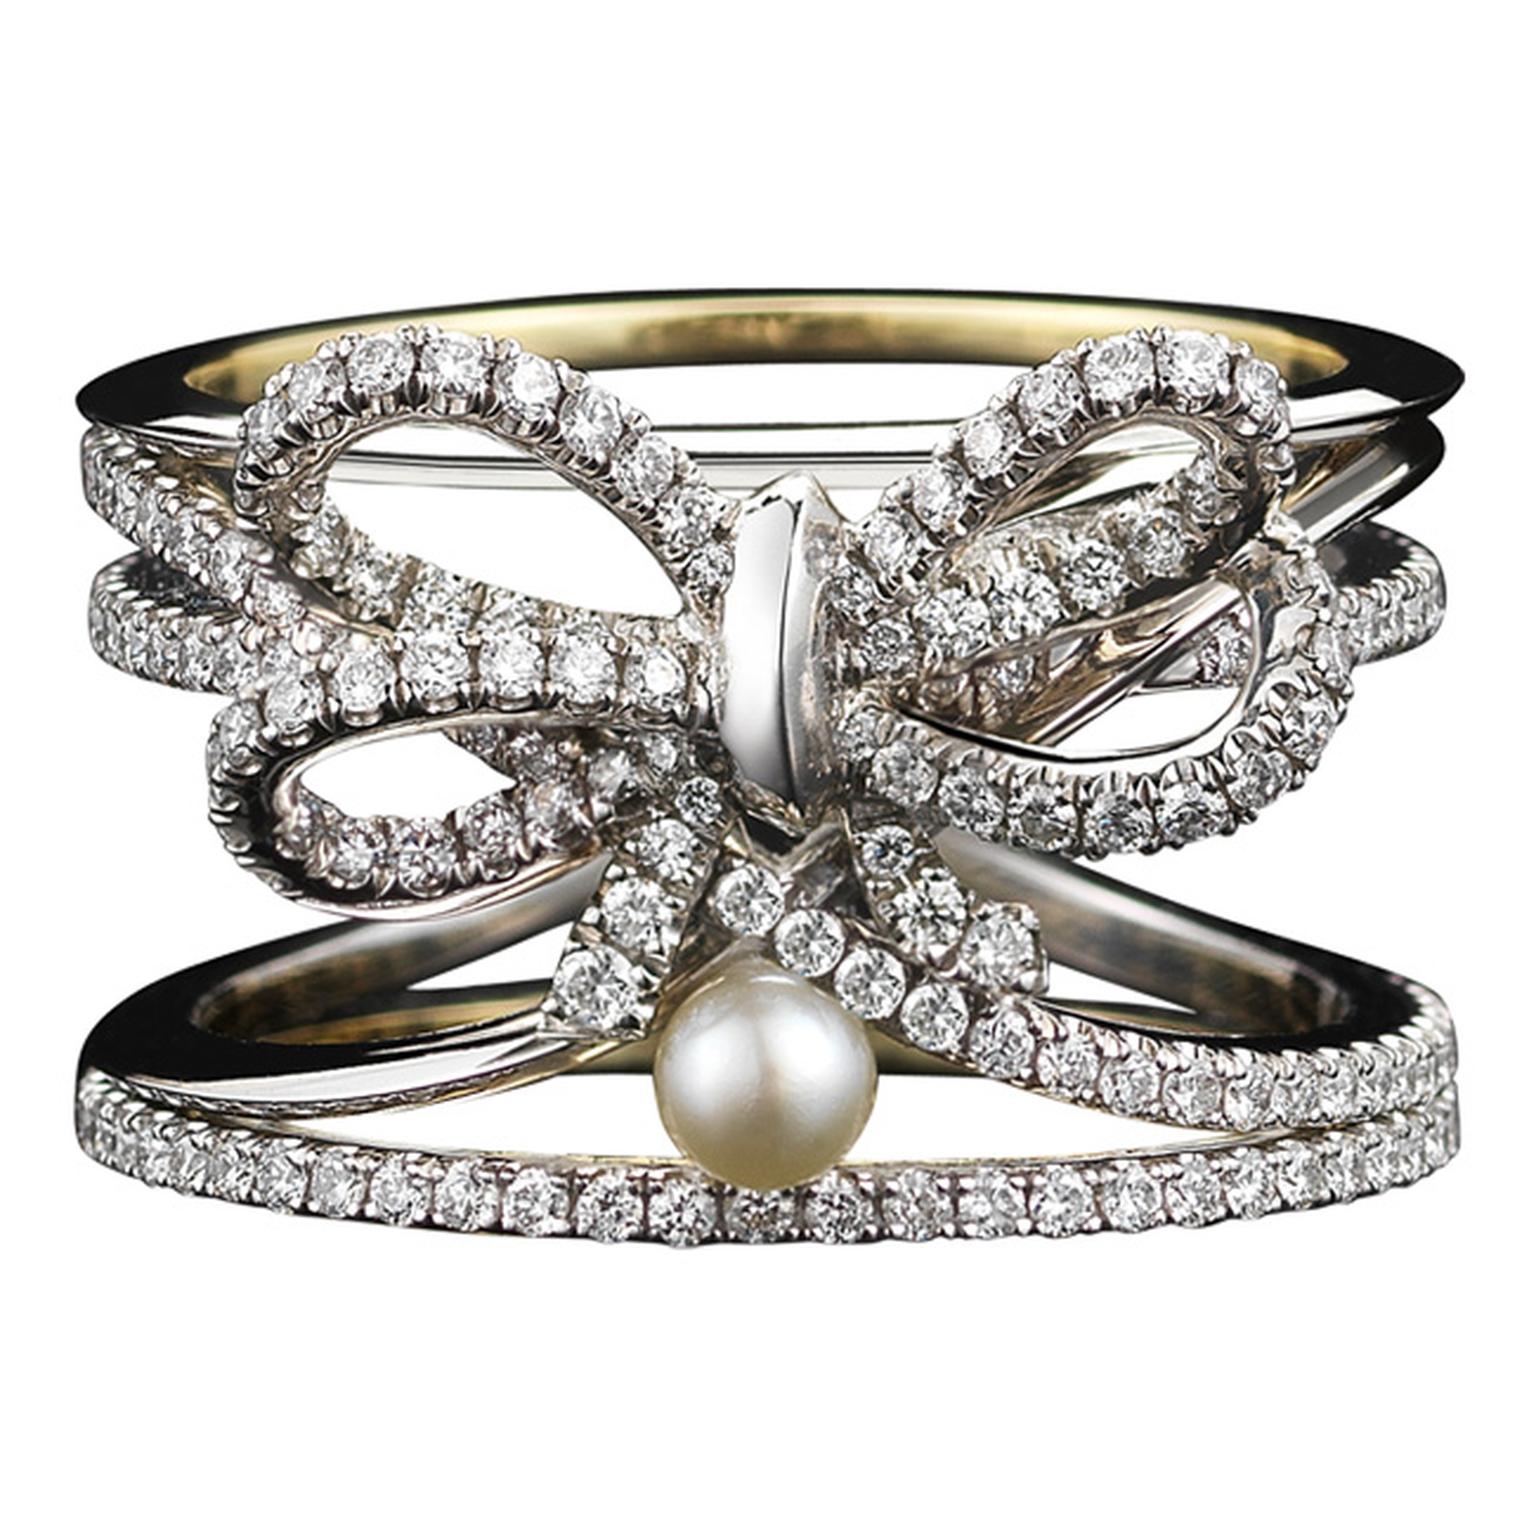 Alexandra_Mor_limited_edition_diamond_bow_and_pearl_Ring_20140117_Main